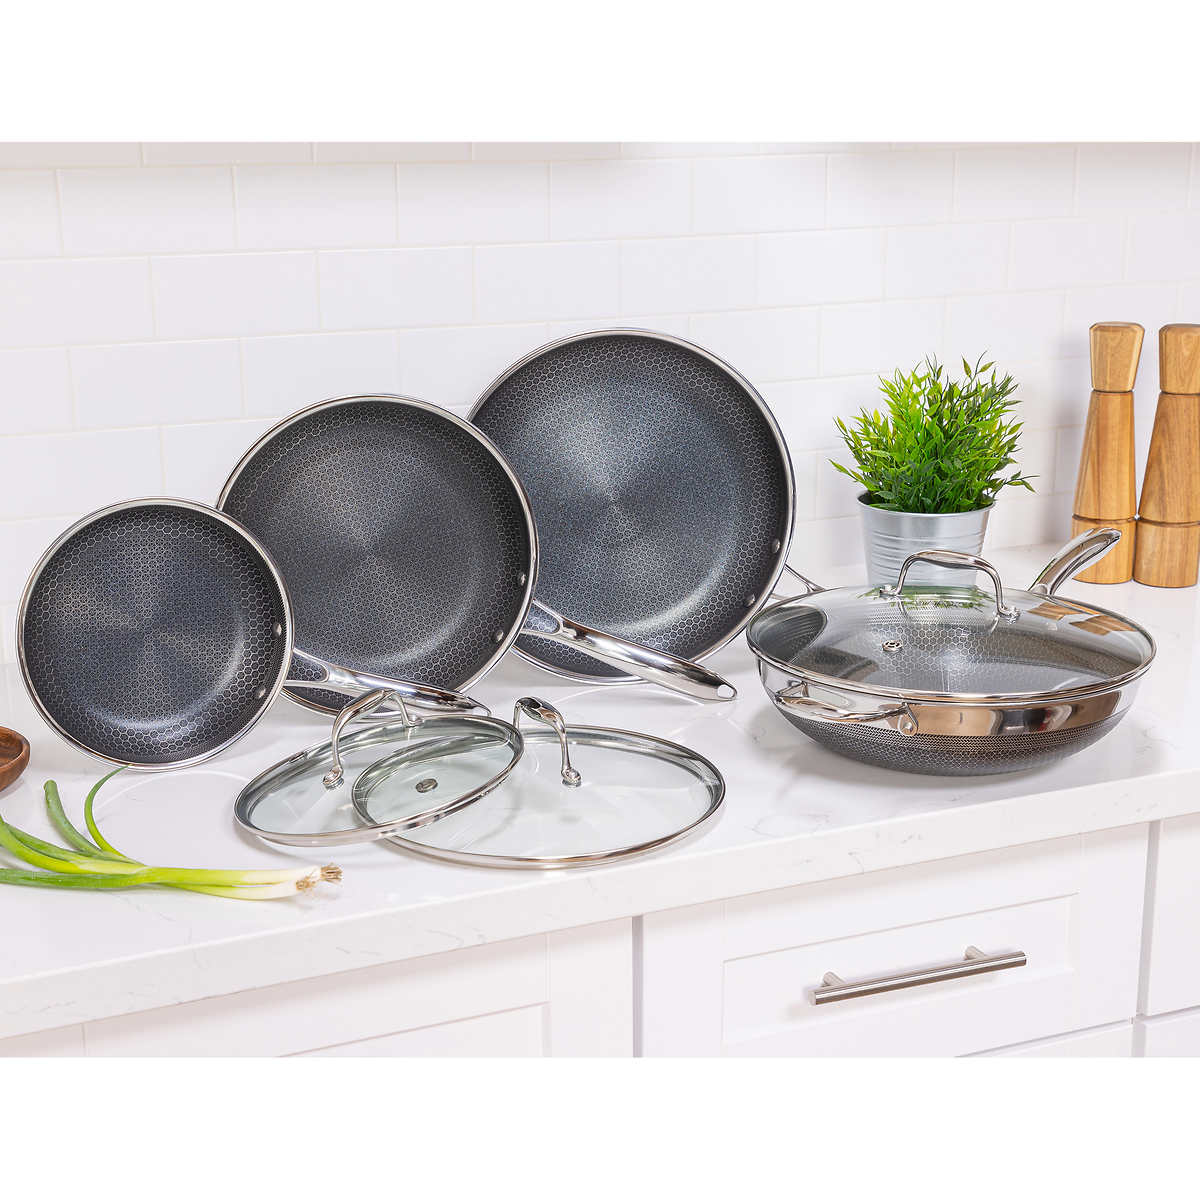 Hexclad Cookware Review: Why You Should Consider Hybrid Nonstick